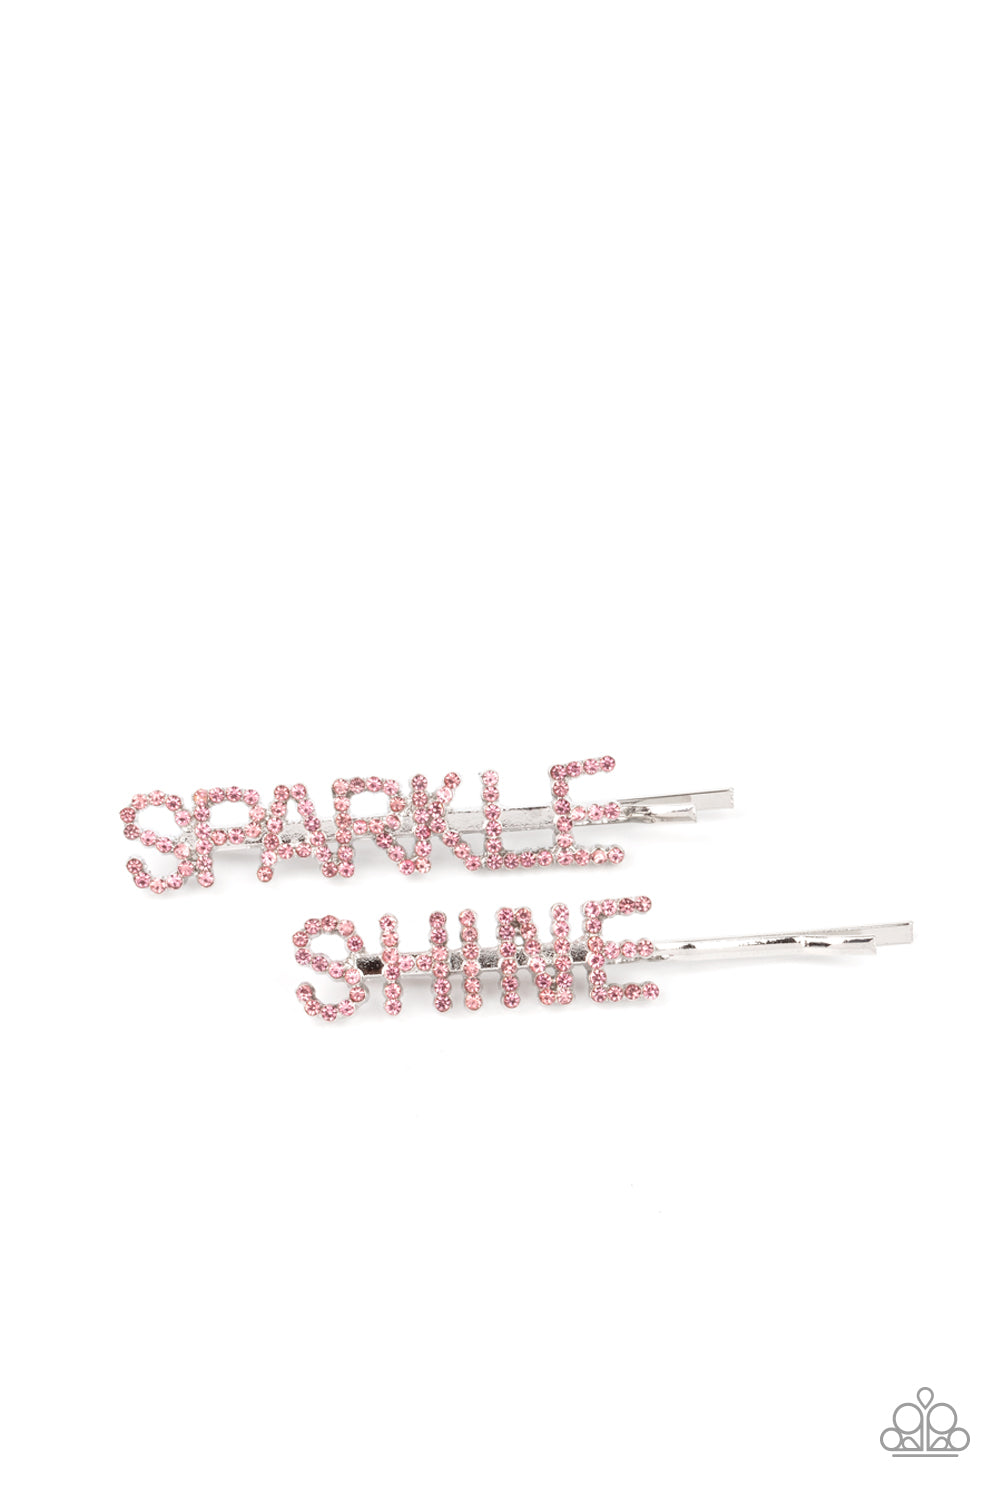 Center of the SPARKLE-verse - Pink Rhinestone Hair Accessory Paparazzi Accessories